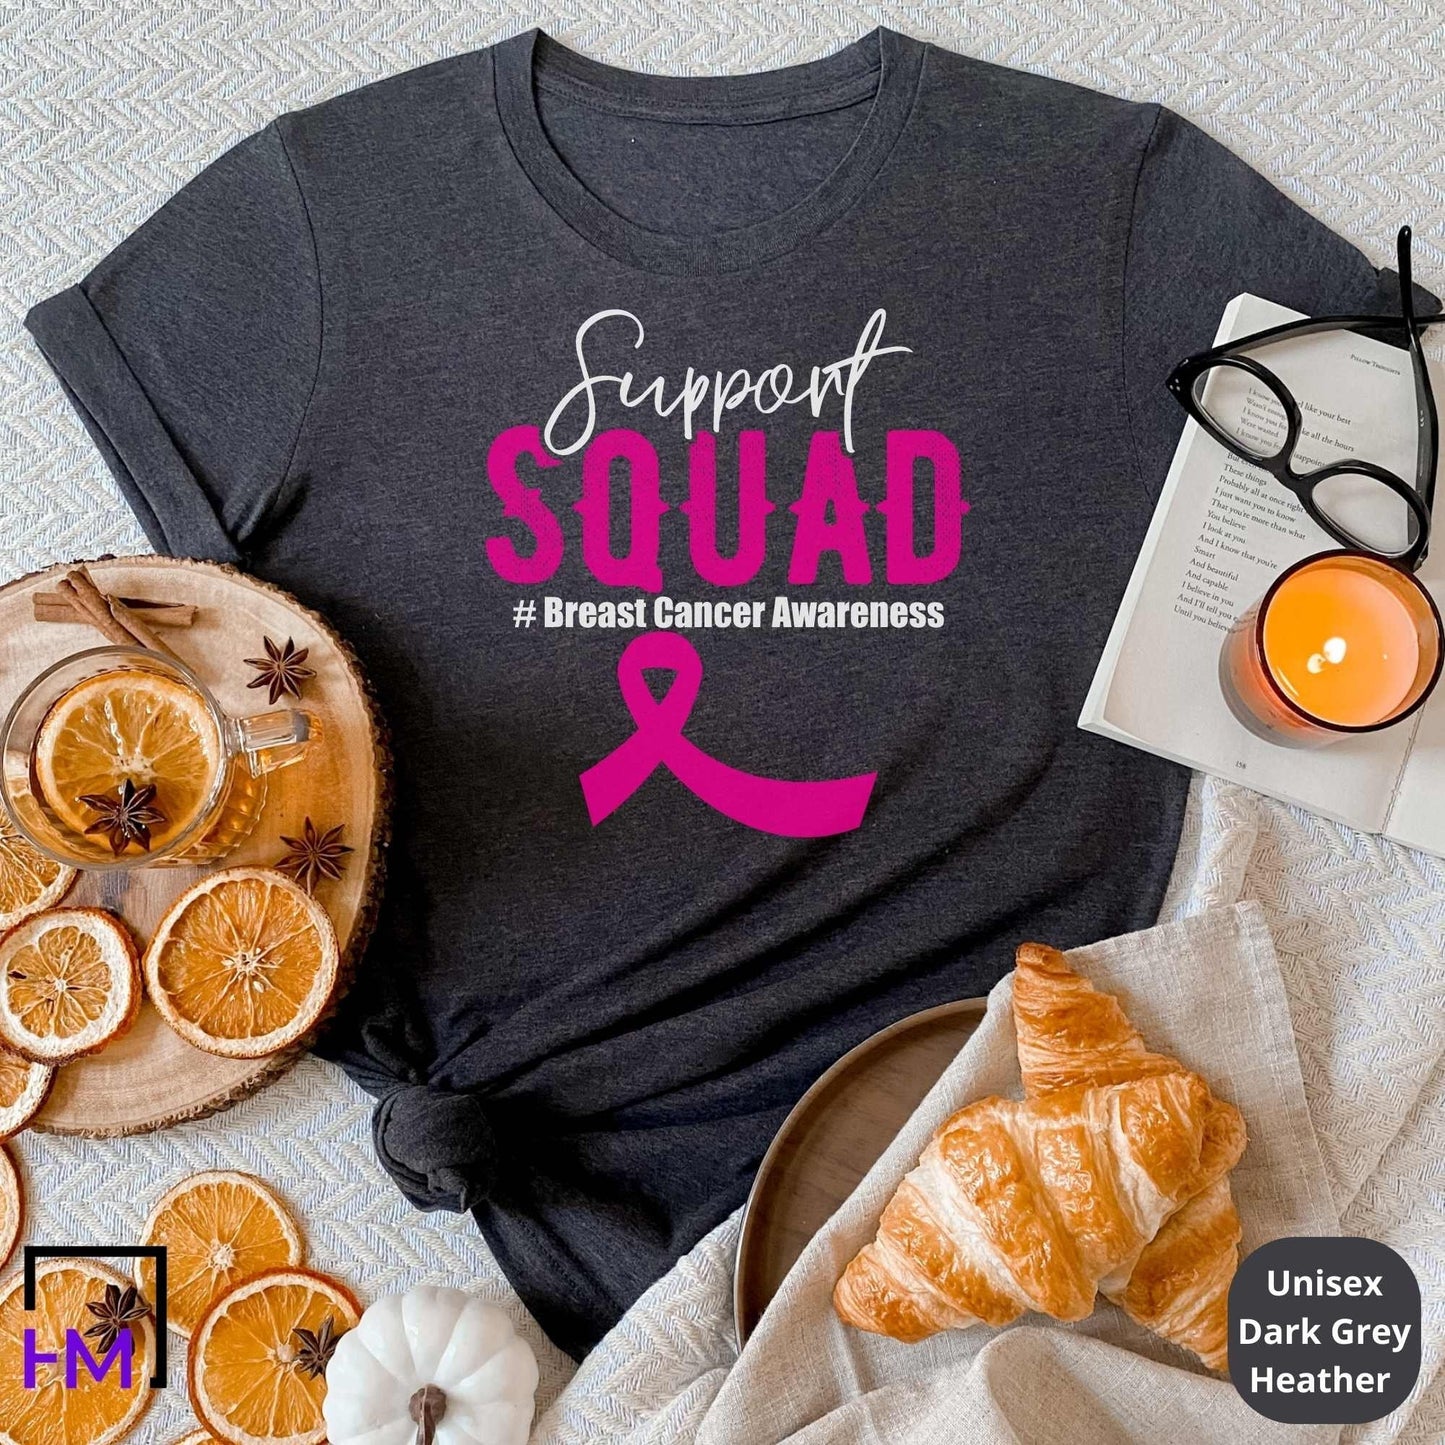 Support Squad Fight Cancer T-shirt, World Cancer Awareness Gift, Breast Cancer Ribbon, Survivor Sweater, Cancer in Every Color Sweatshirt HMDesignStudioUS